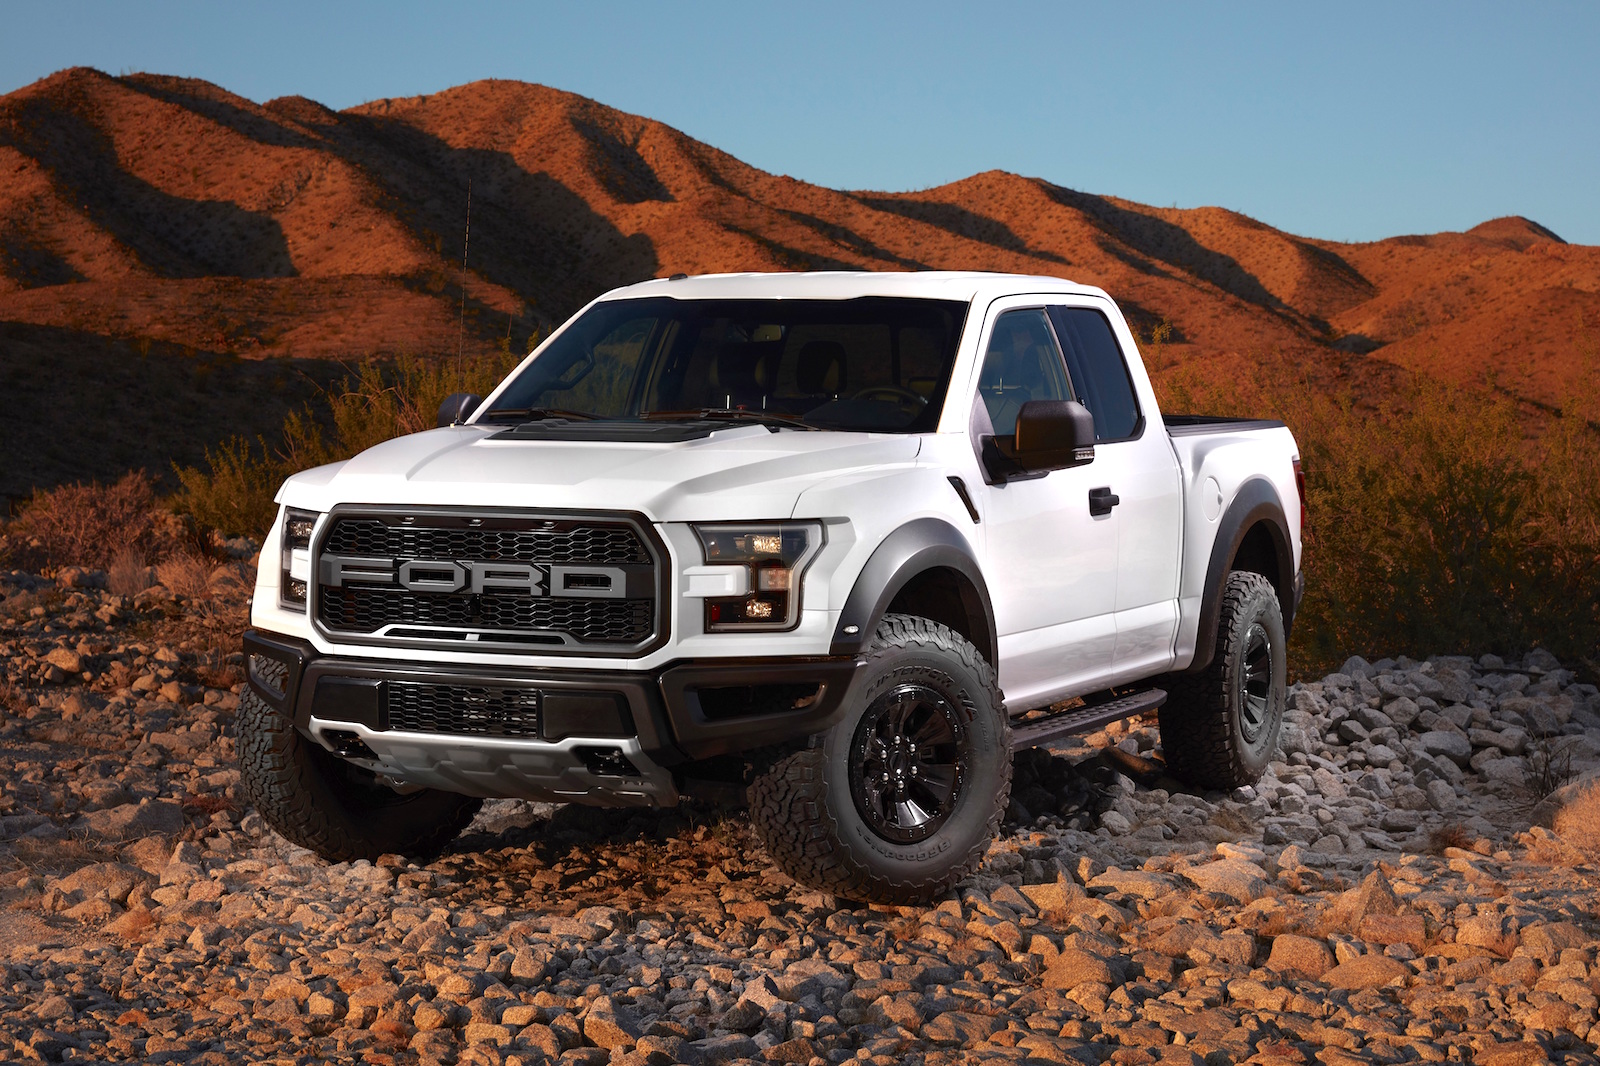 How much is the 2017 ford raptor going to be 2017 Ford Raptor Price Starting At 49 520 How High Will It Go The Fast Lane Truck